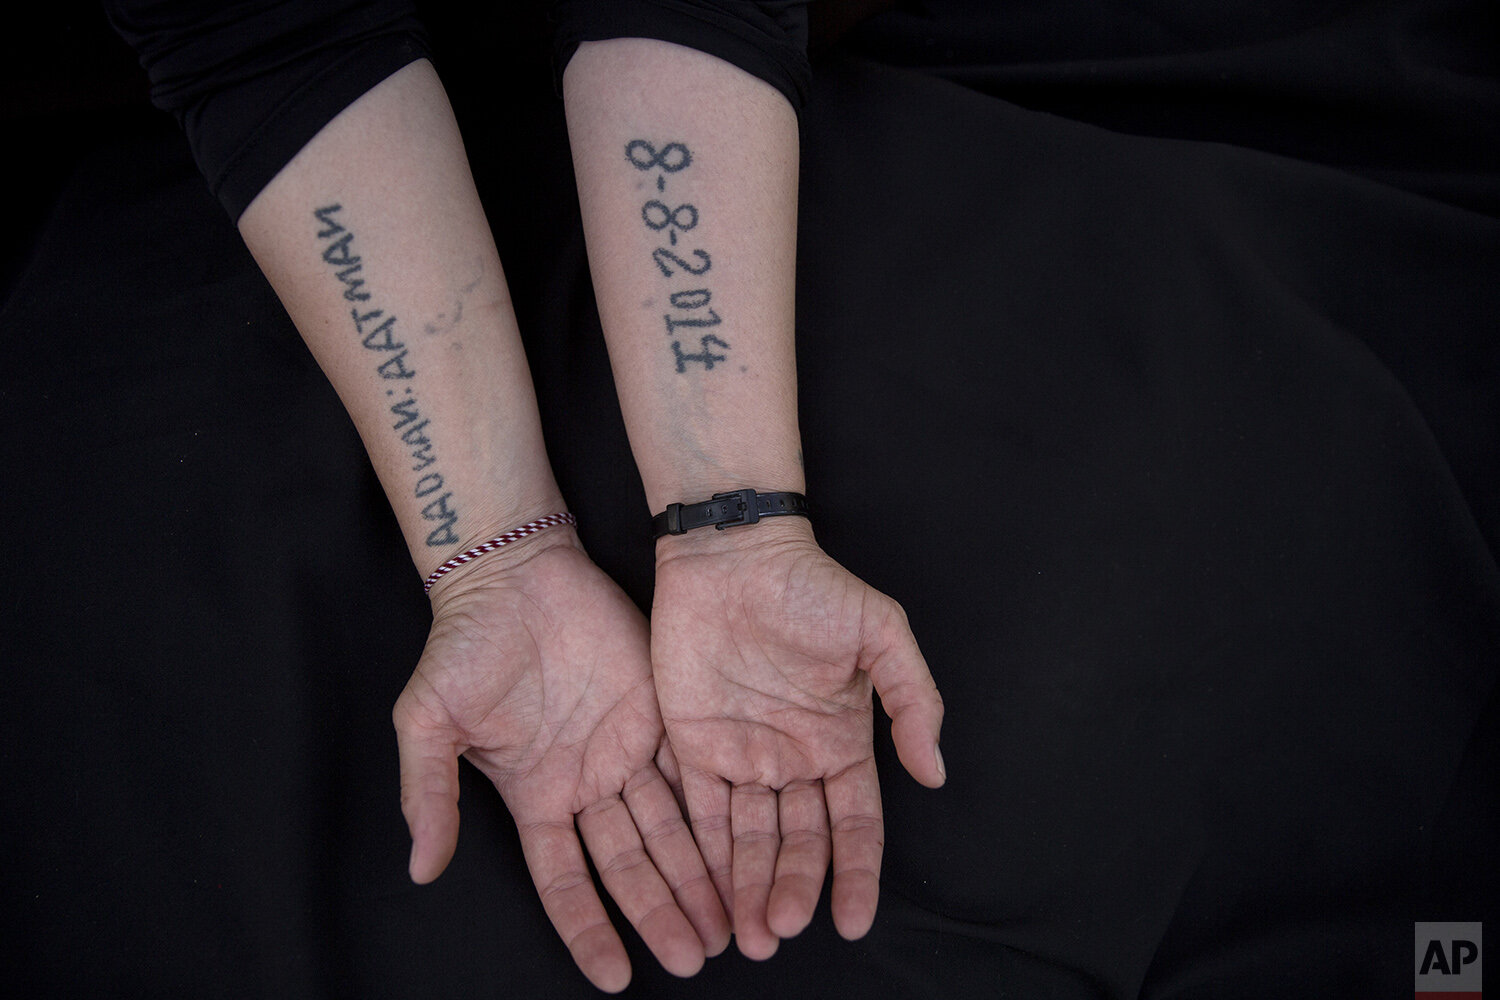  In this Thursday, Aug. 29, 2019 photo, Leila Shamo displays tattoos she made while enslaved by Islamic State militants at her home near Khanke Camp, near Dohuk, Iraq. Shamo, 34, has used her breast milk, charcoal ash and a needle to write the names 